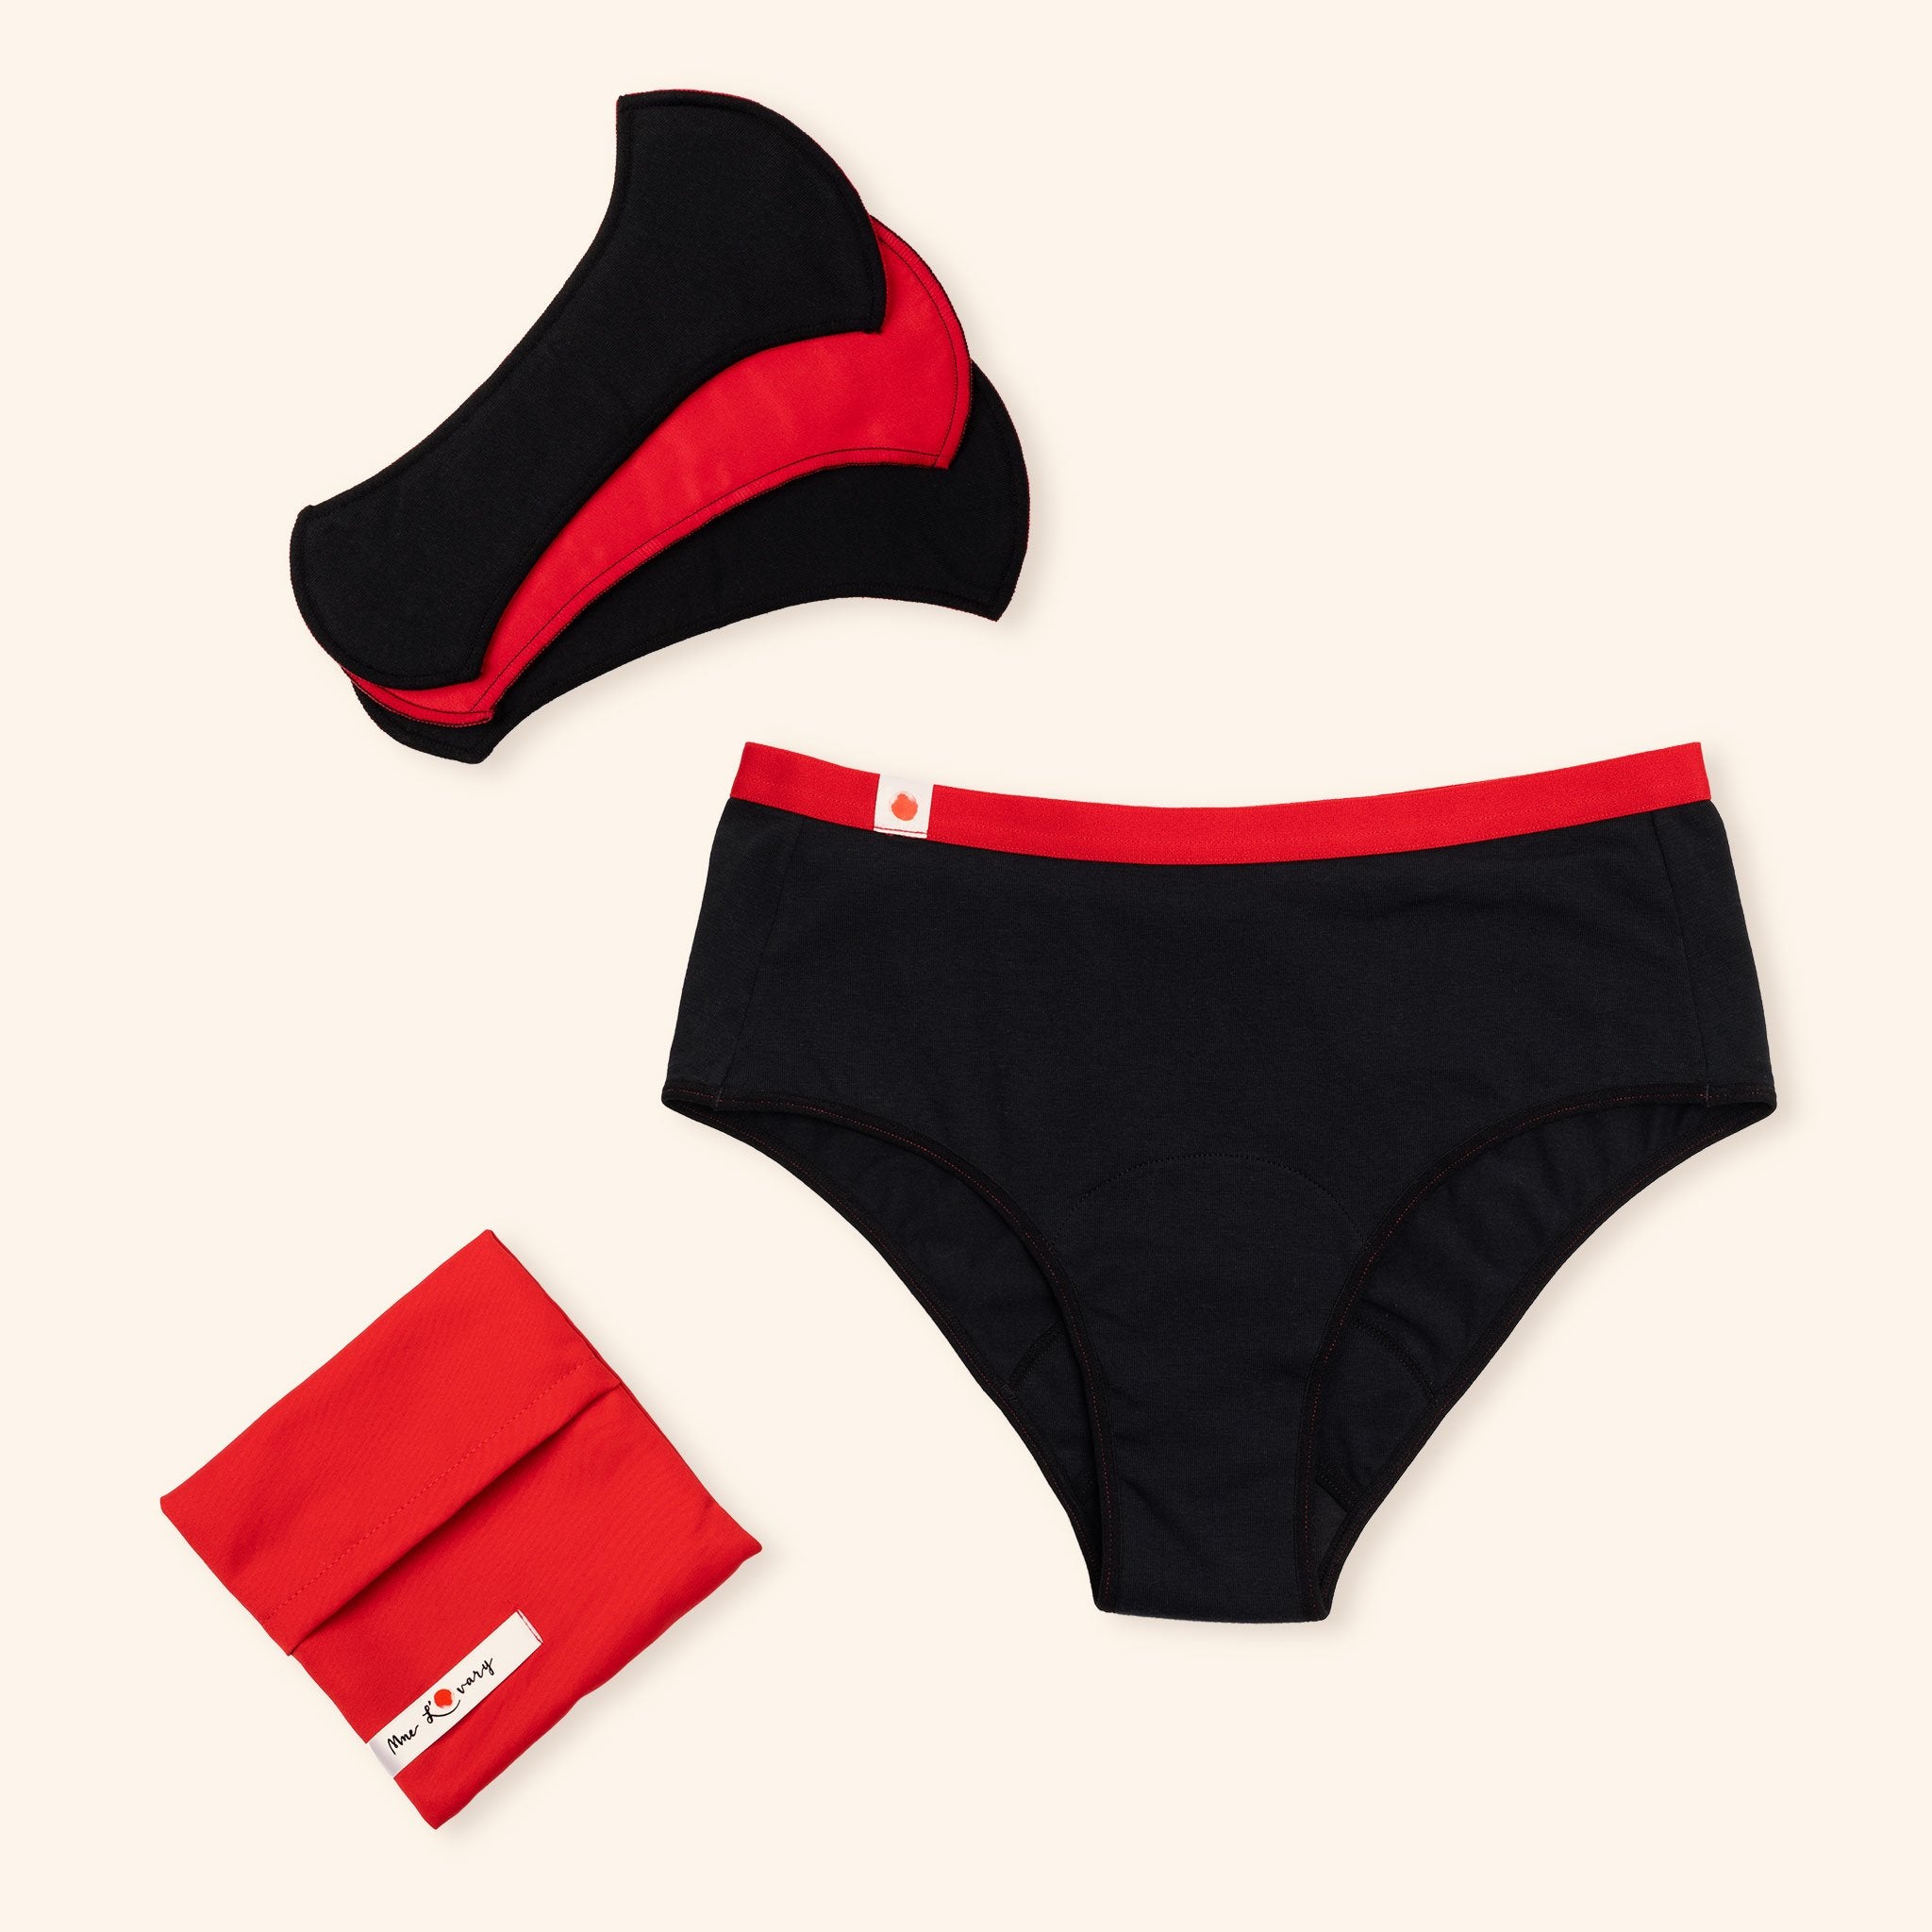 The Highty: Period underwear + 3 removable pads